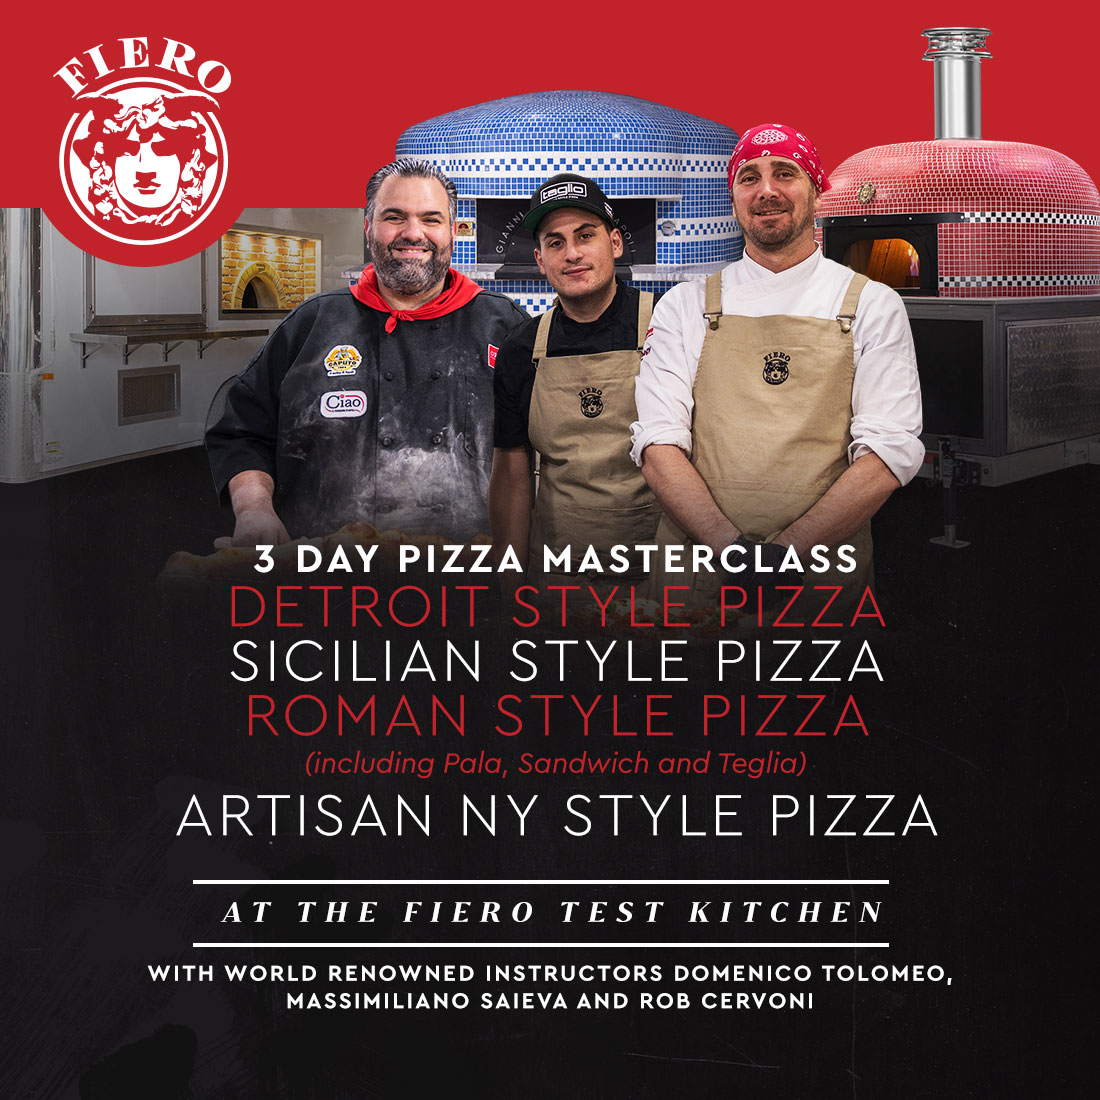 3 Day Masterclass for Roman, Detroit, Sicilian, and New York Style Pizza